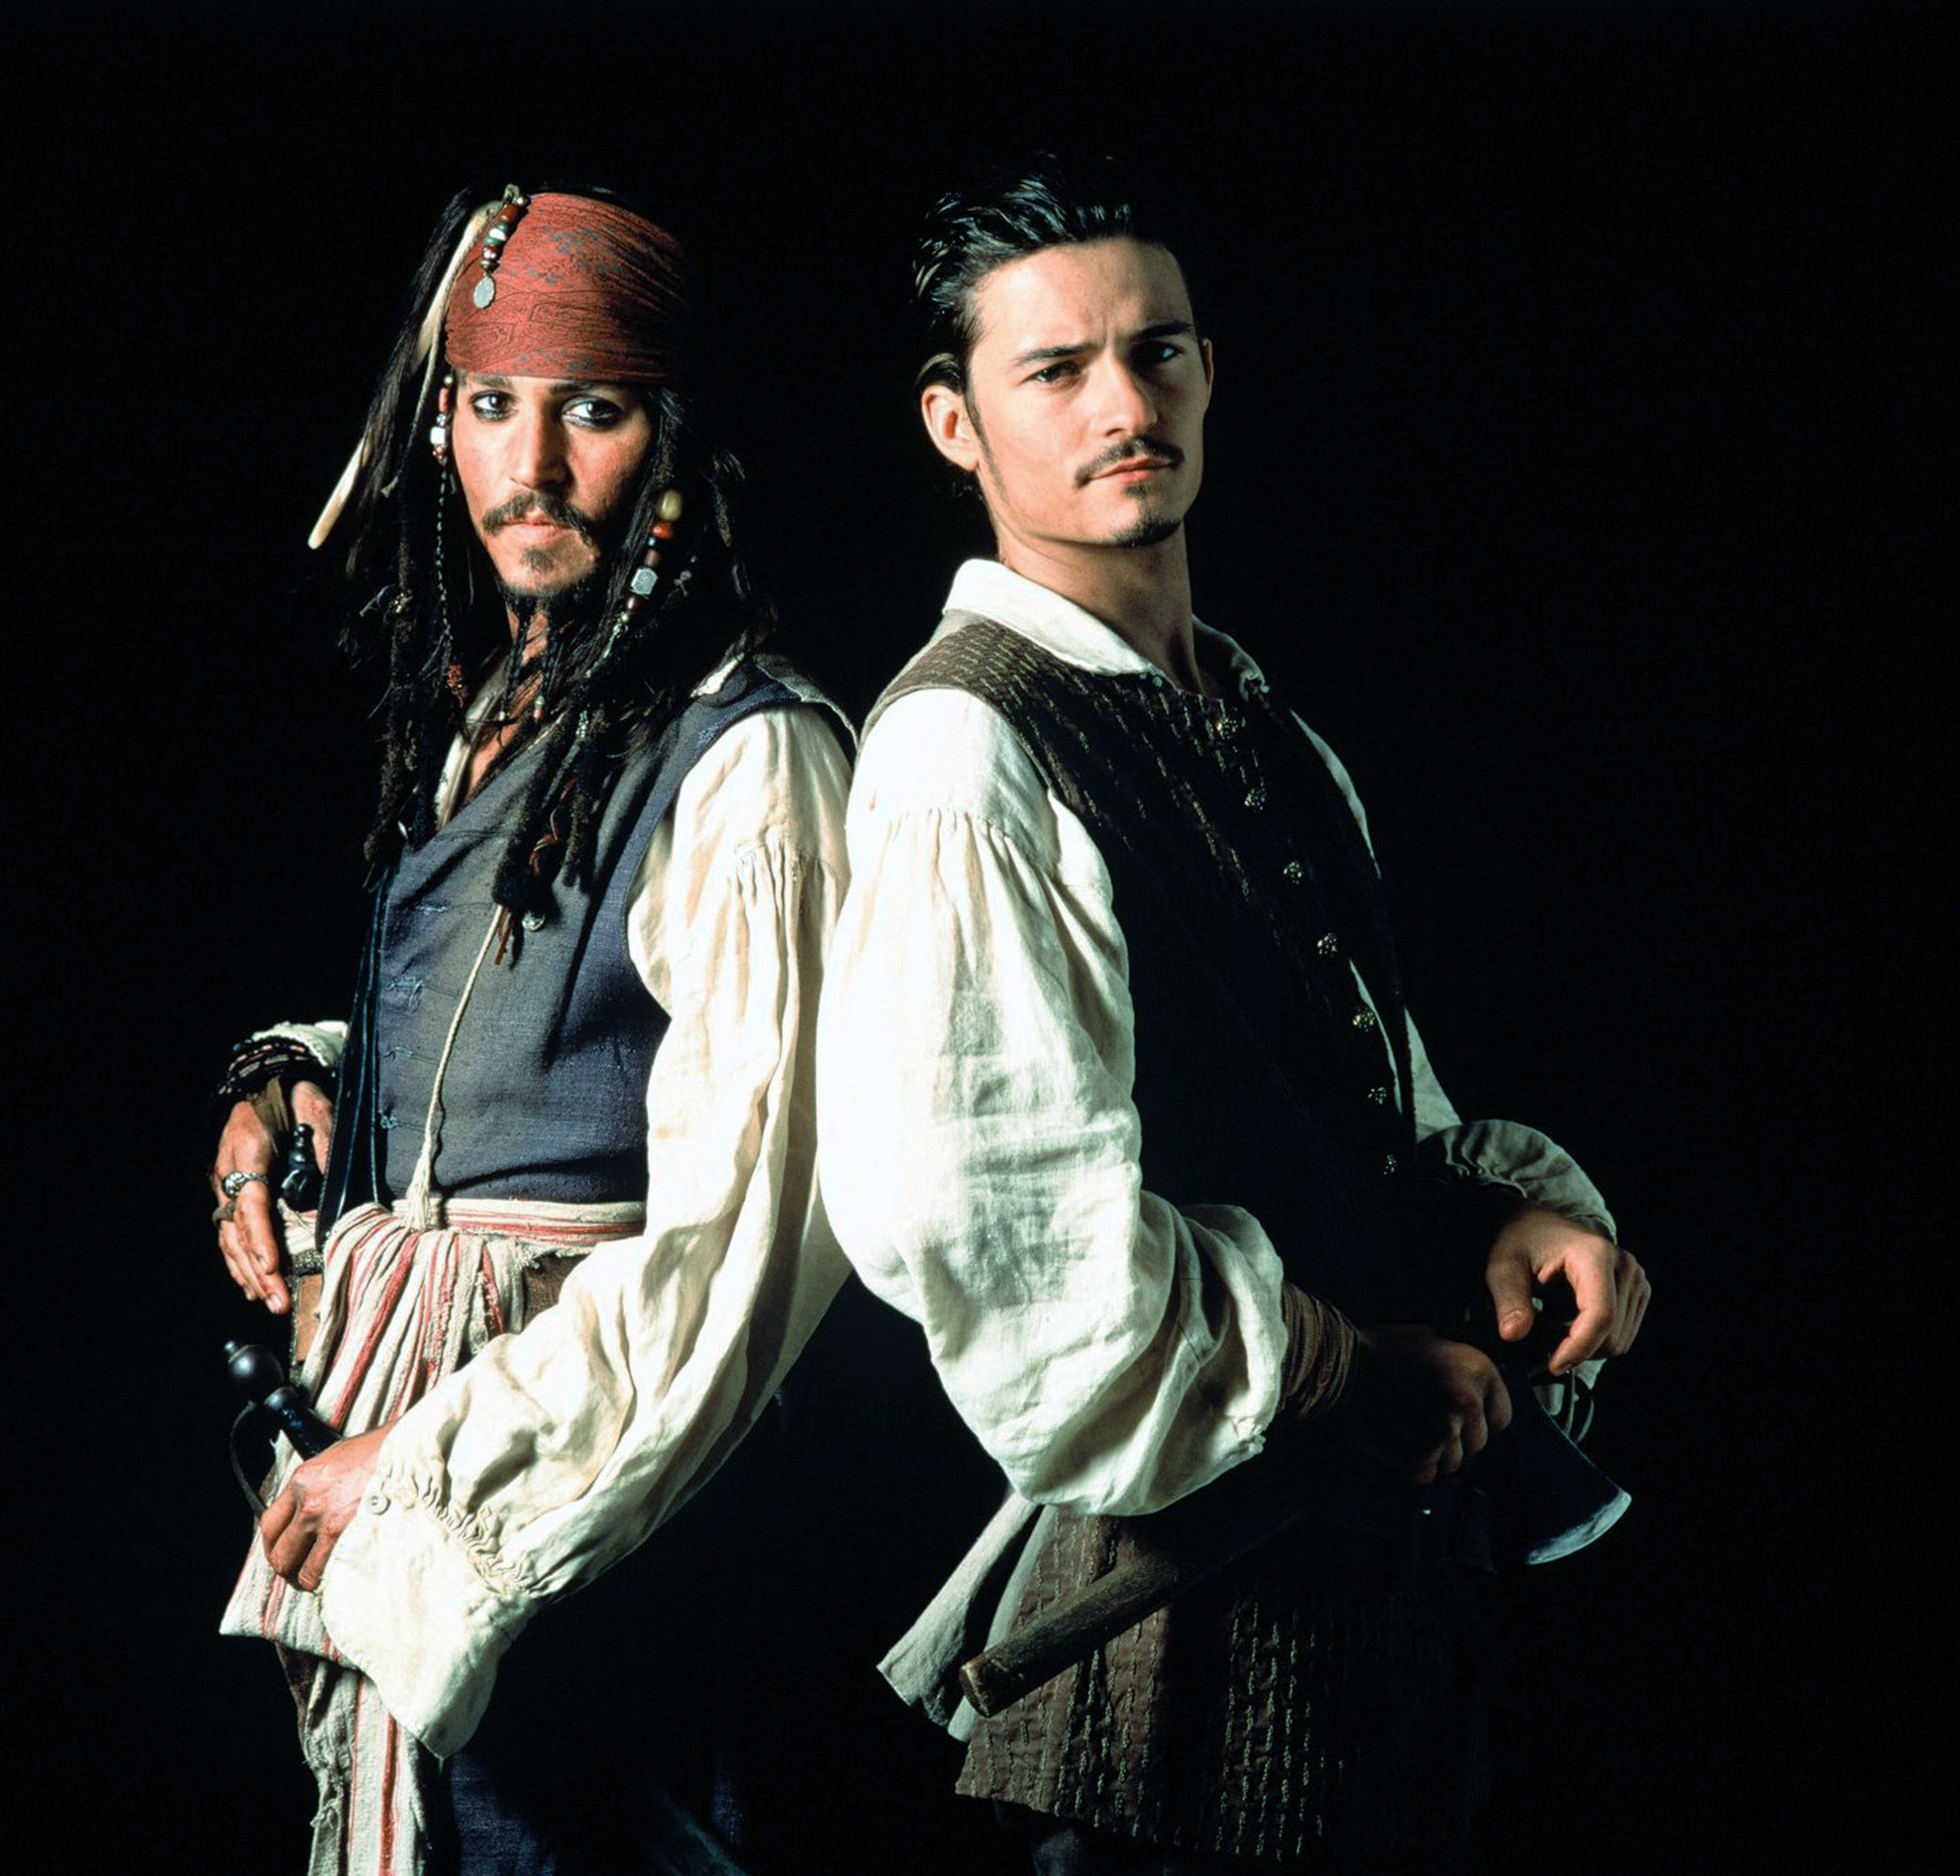 Orlando Bloom and Johnny Depp stand with their backs against each other